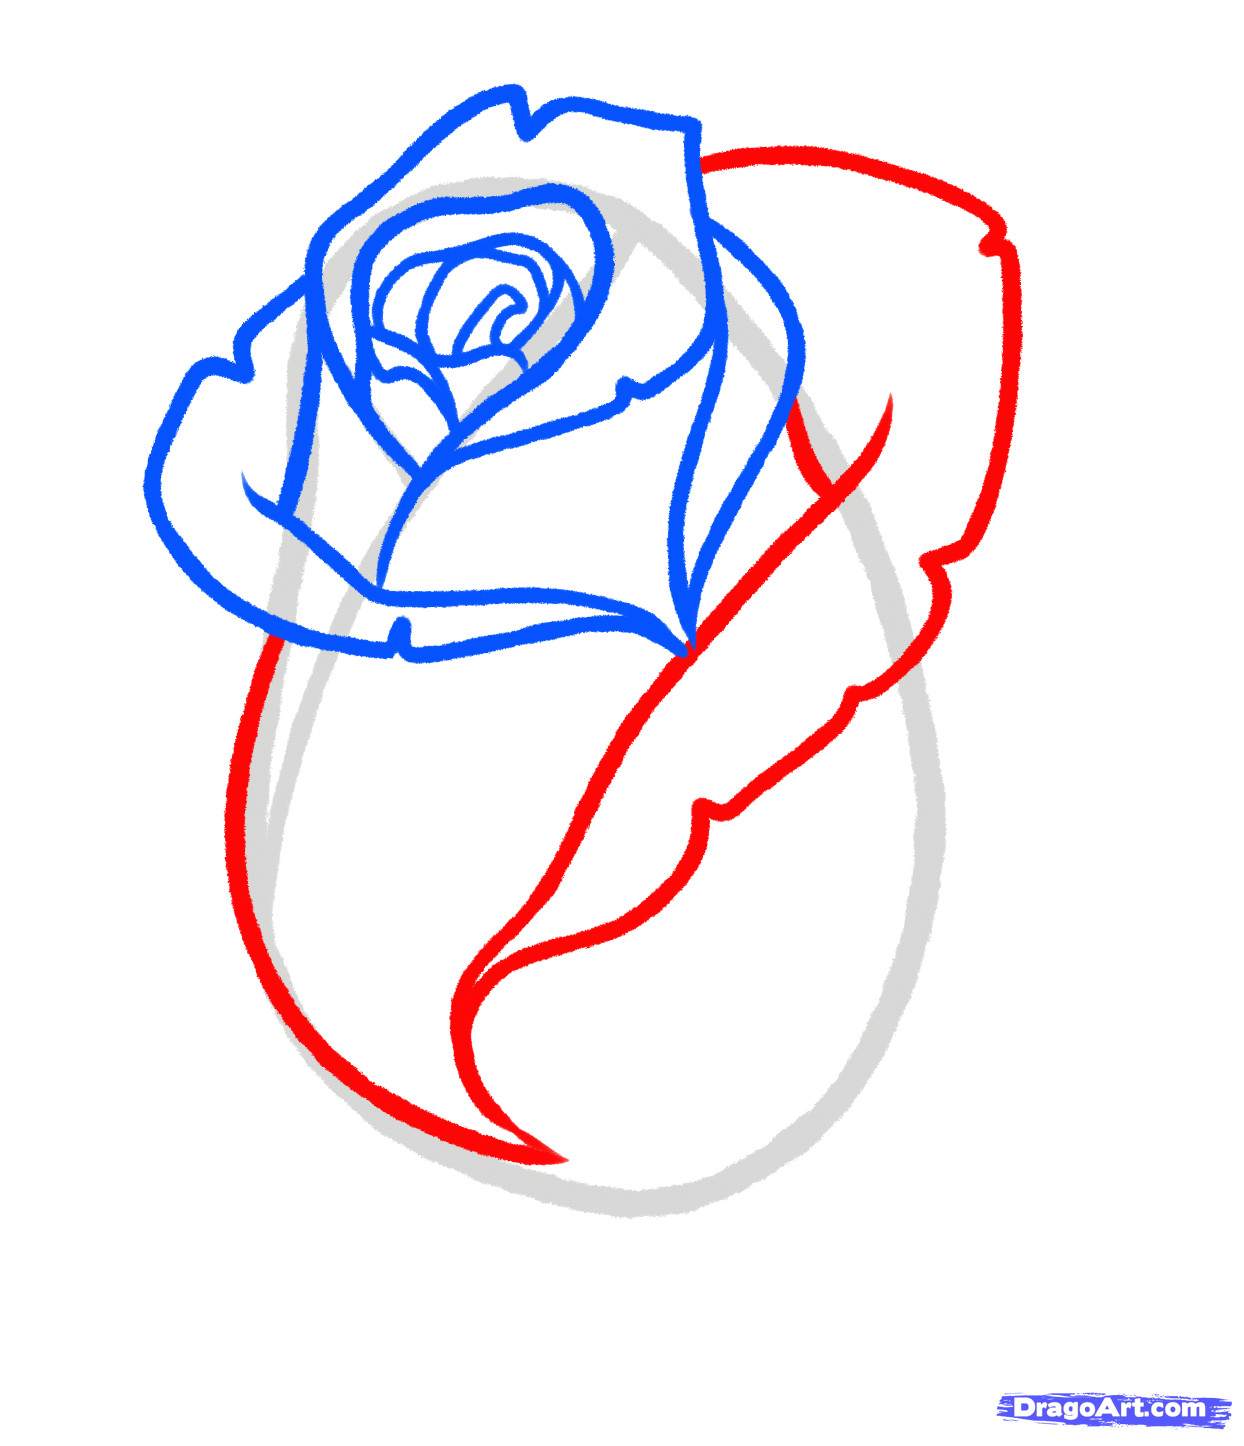 Steps for Drawing A Rose How to Draw A Rose Bud Rose Bud Step 5 Sketching Flowers